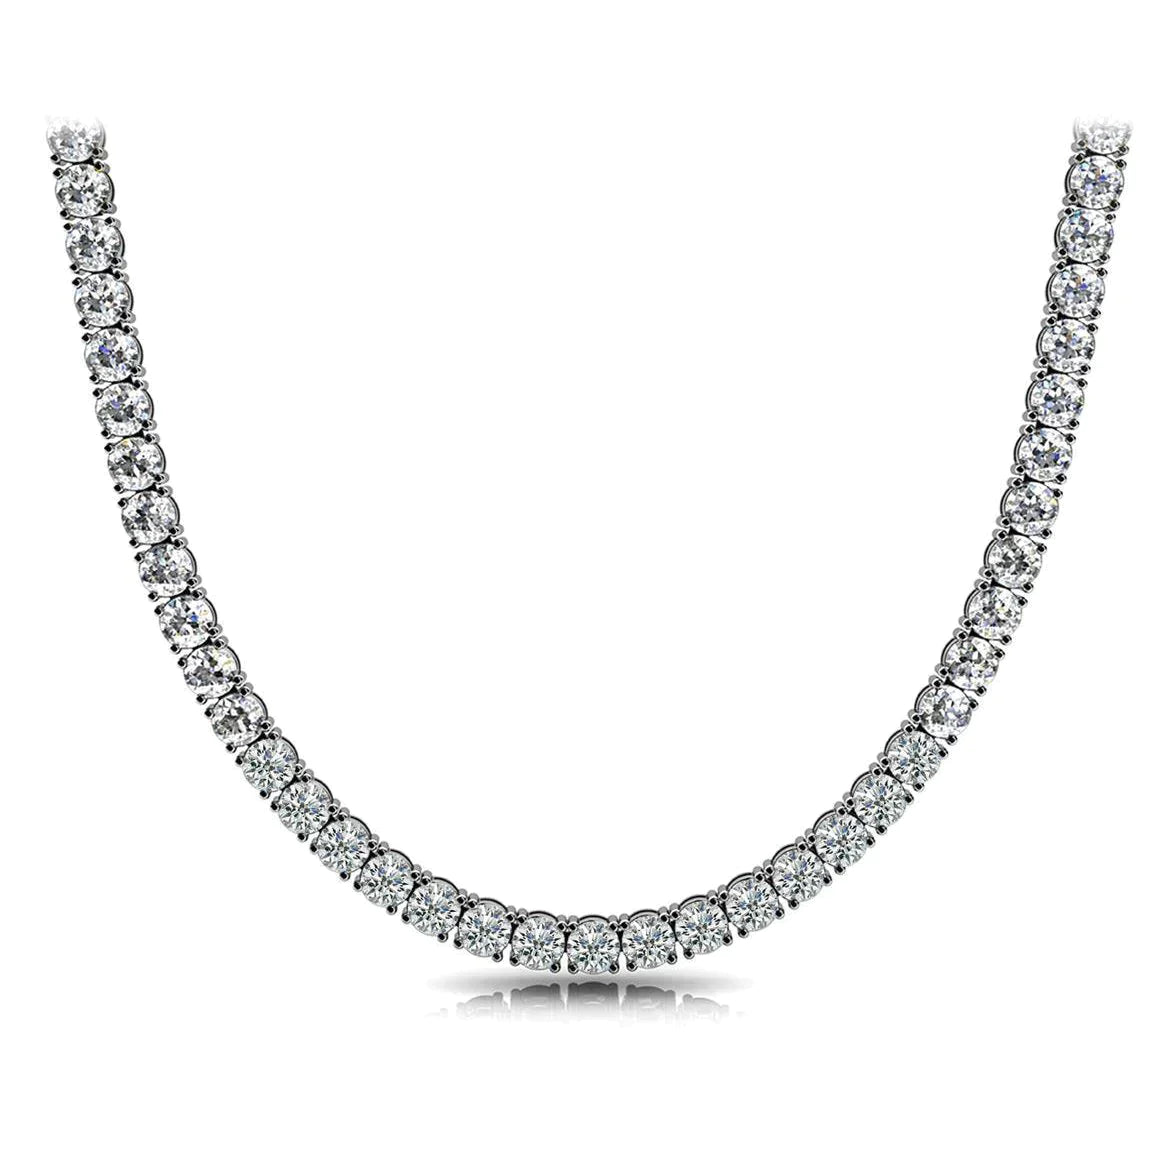 White Gold 20 Carat Real Diamond Necklace